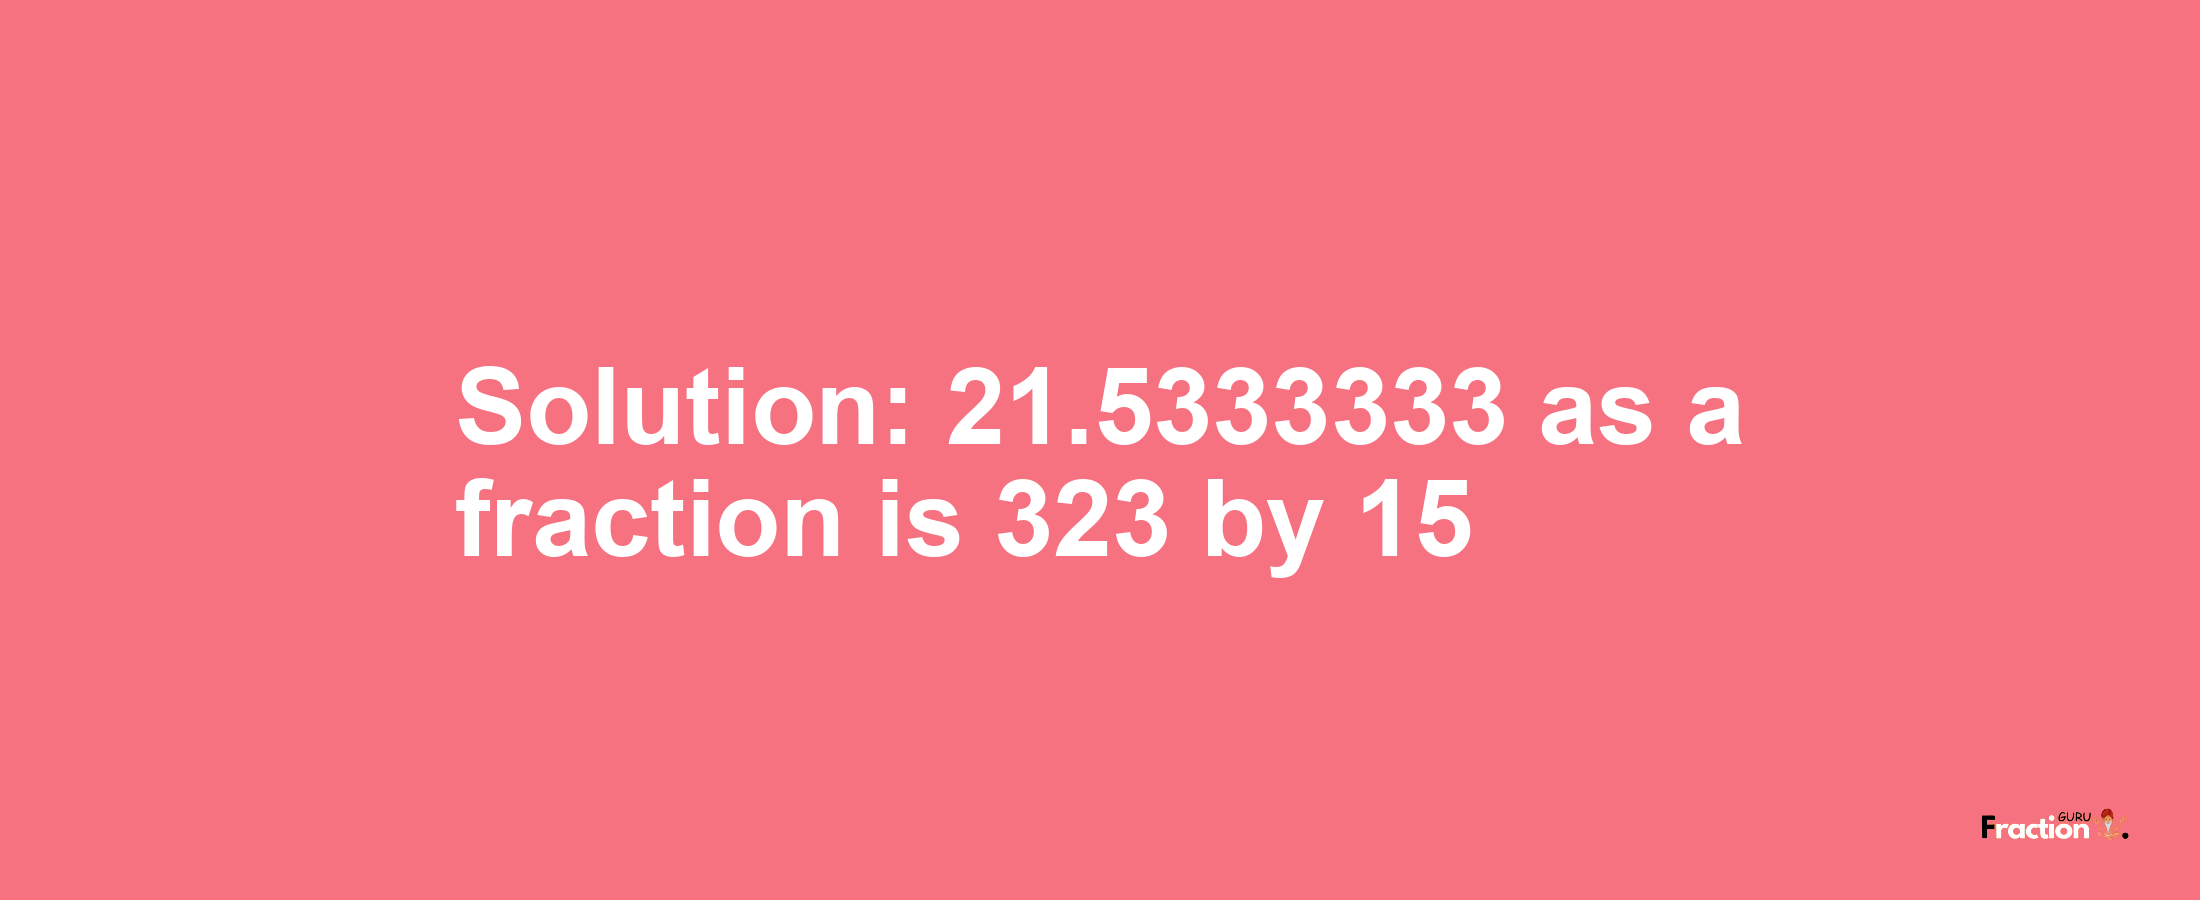 Solution:21.5333333 as a fraction is 323/15